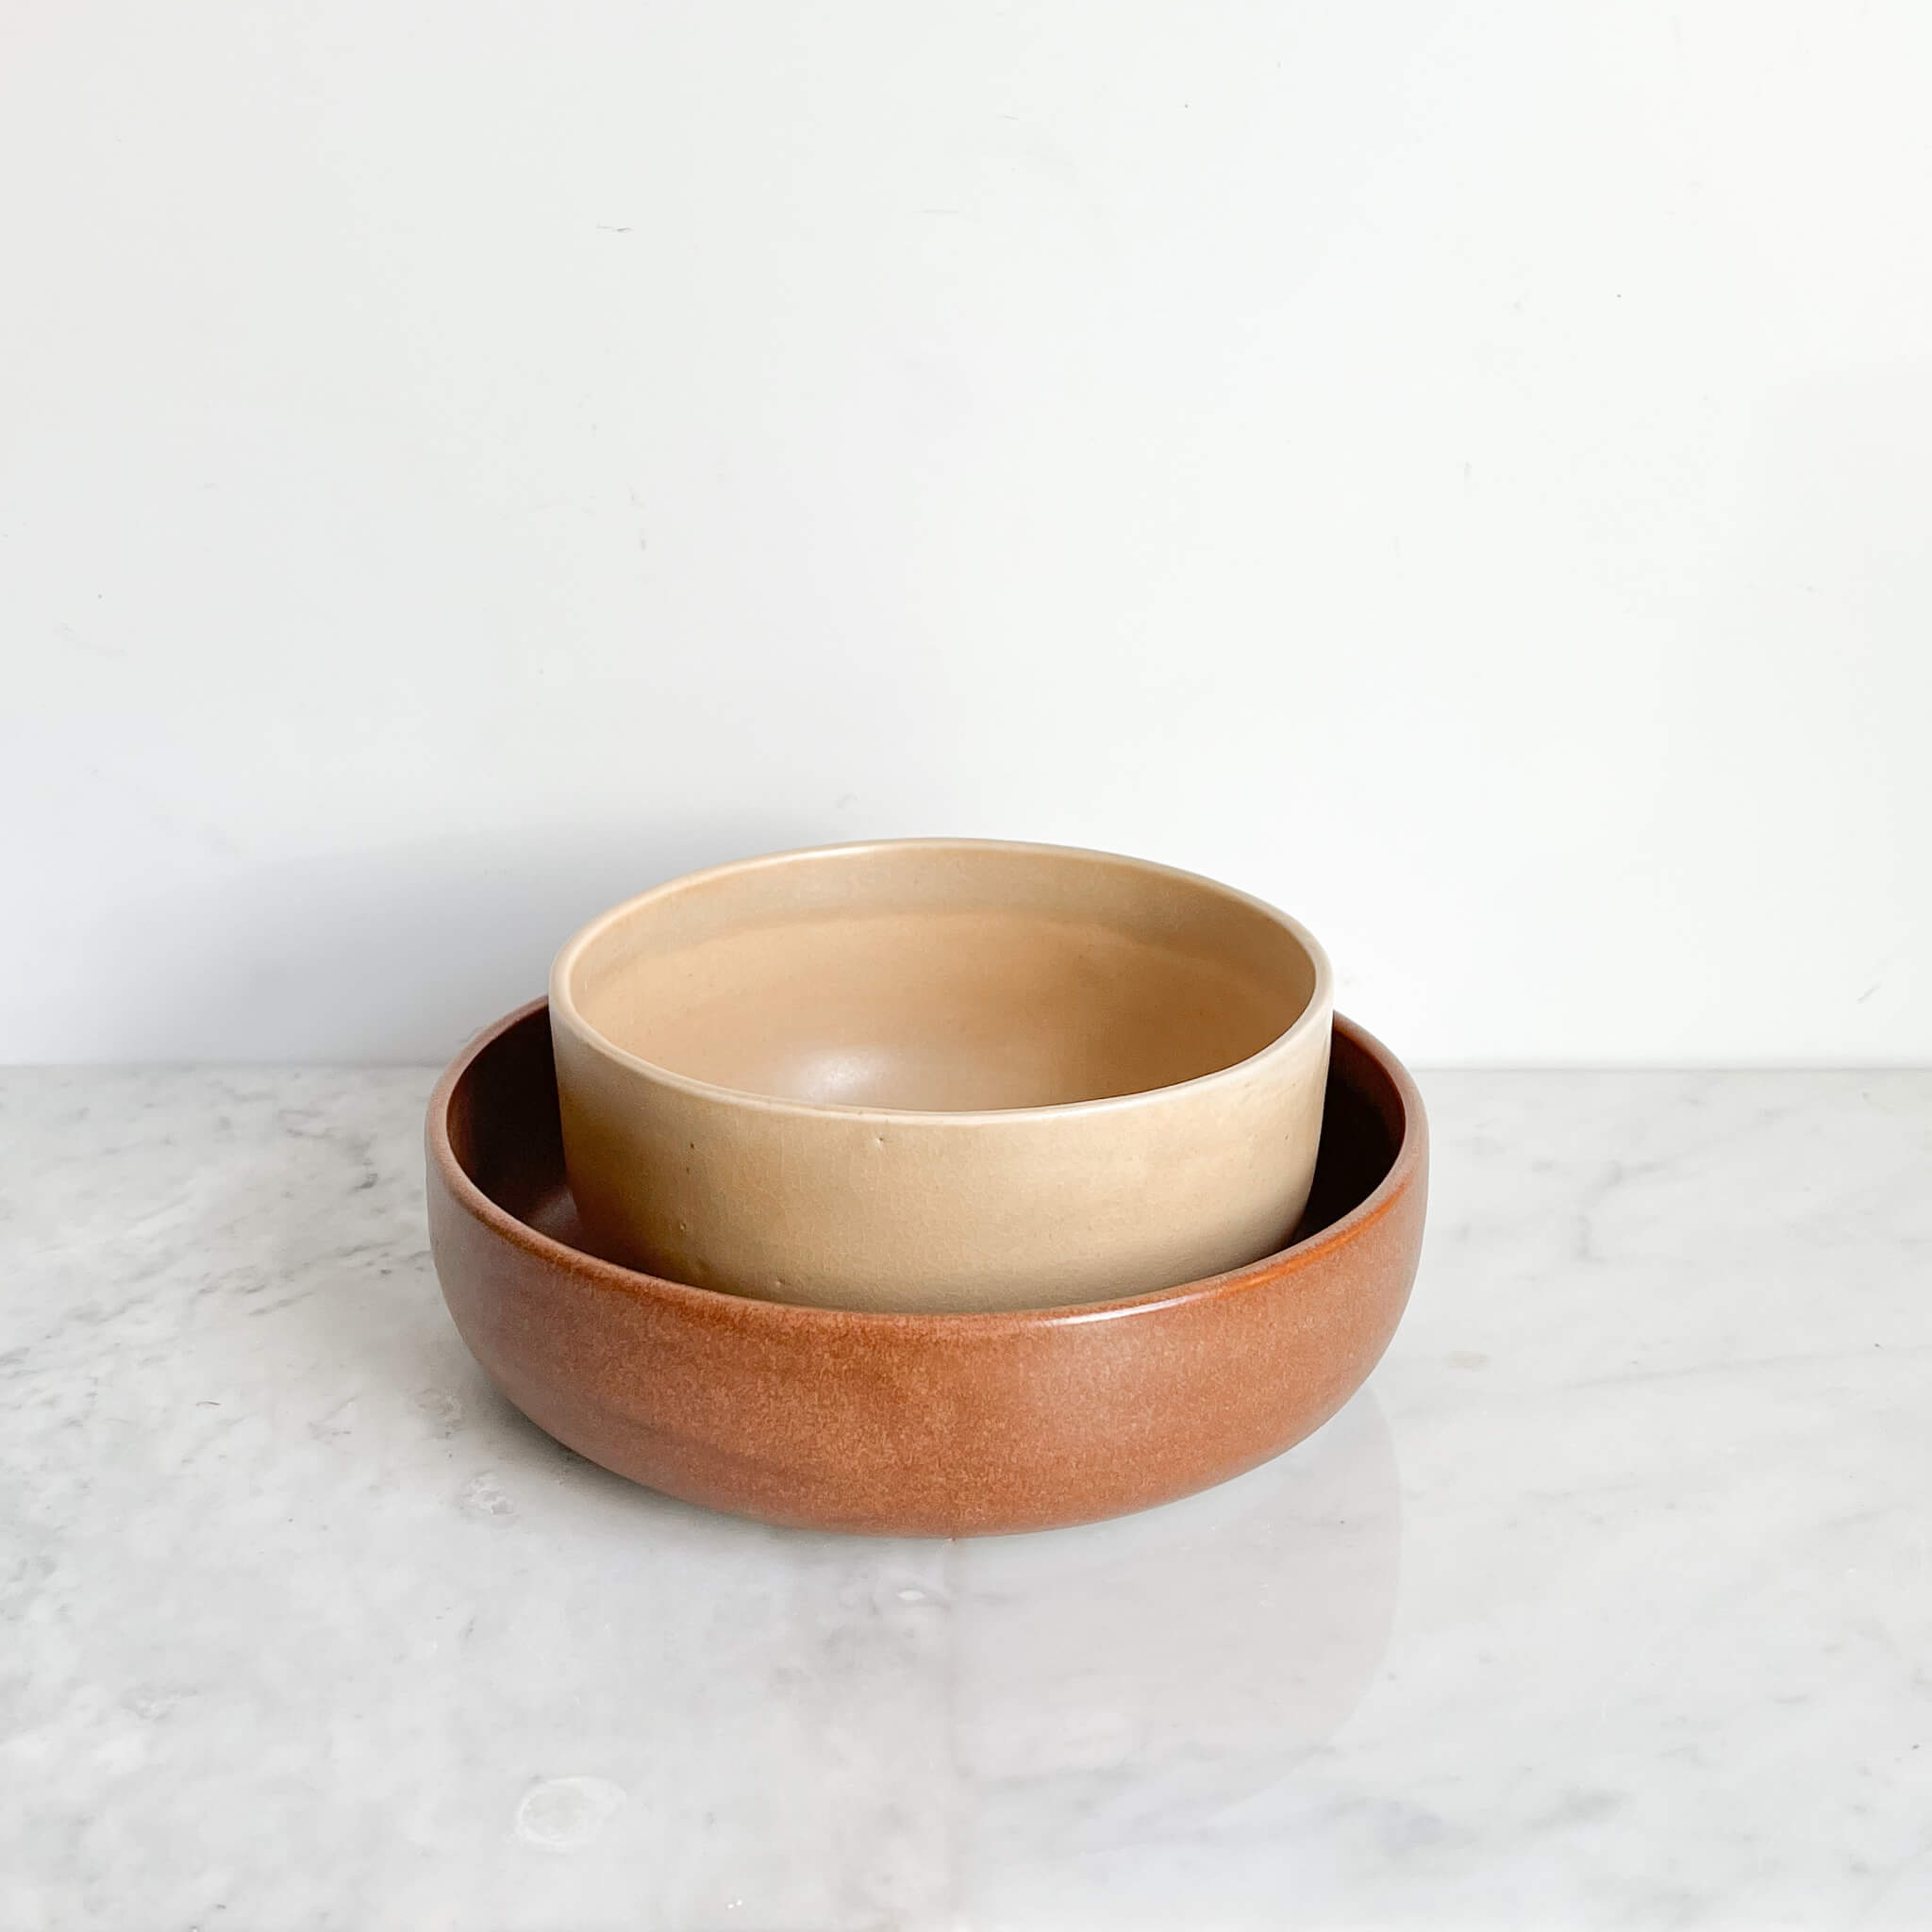 A set of stacked stoneware serving bowls on a white marble counter.